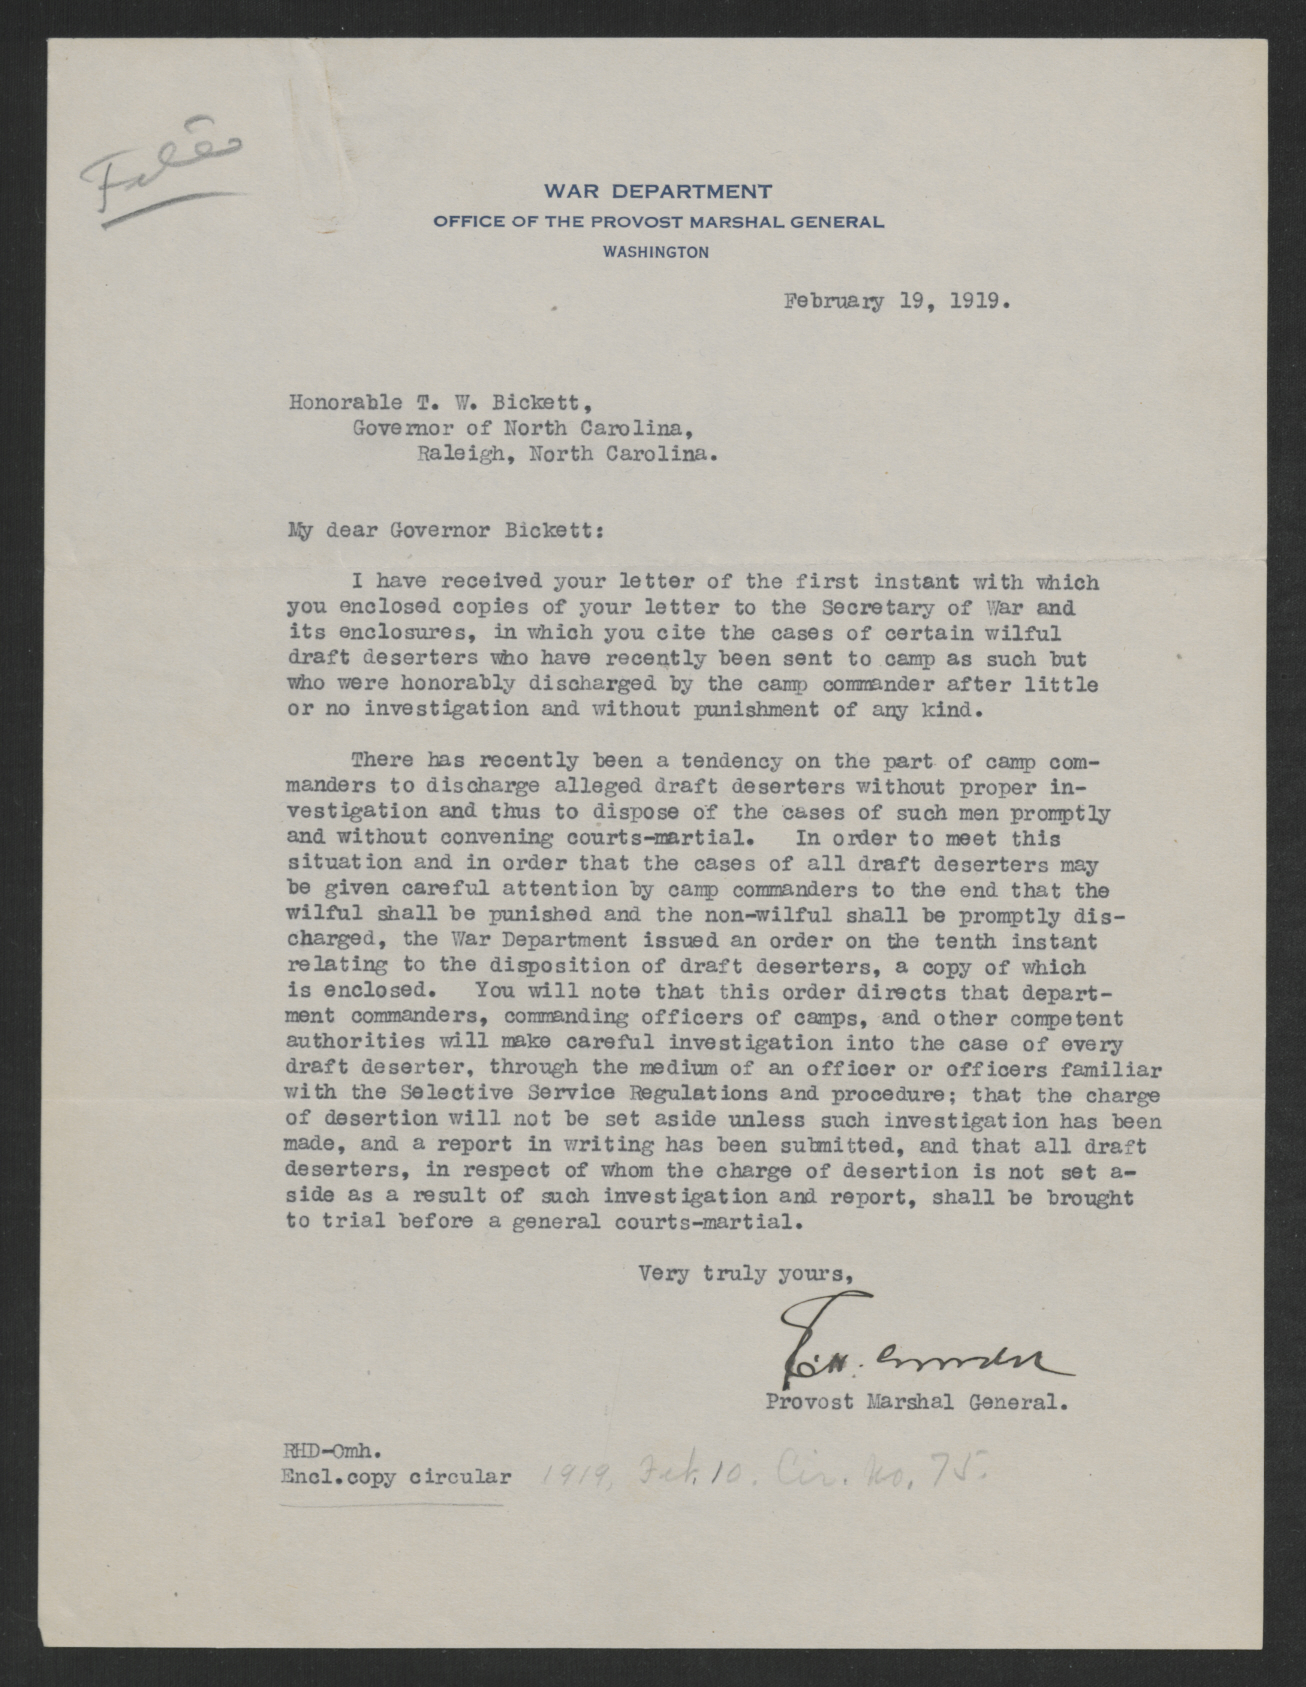 Letter from Enoch H. Crowder to Thomas W. Bickett, February 19, 1919